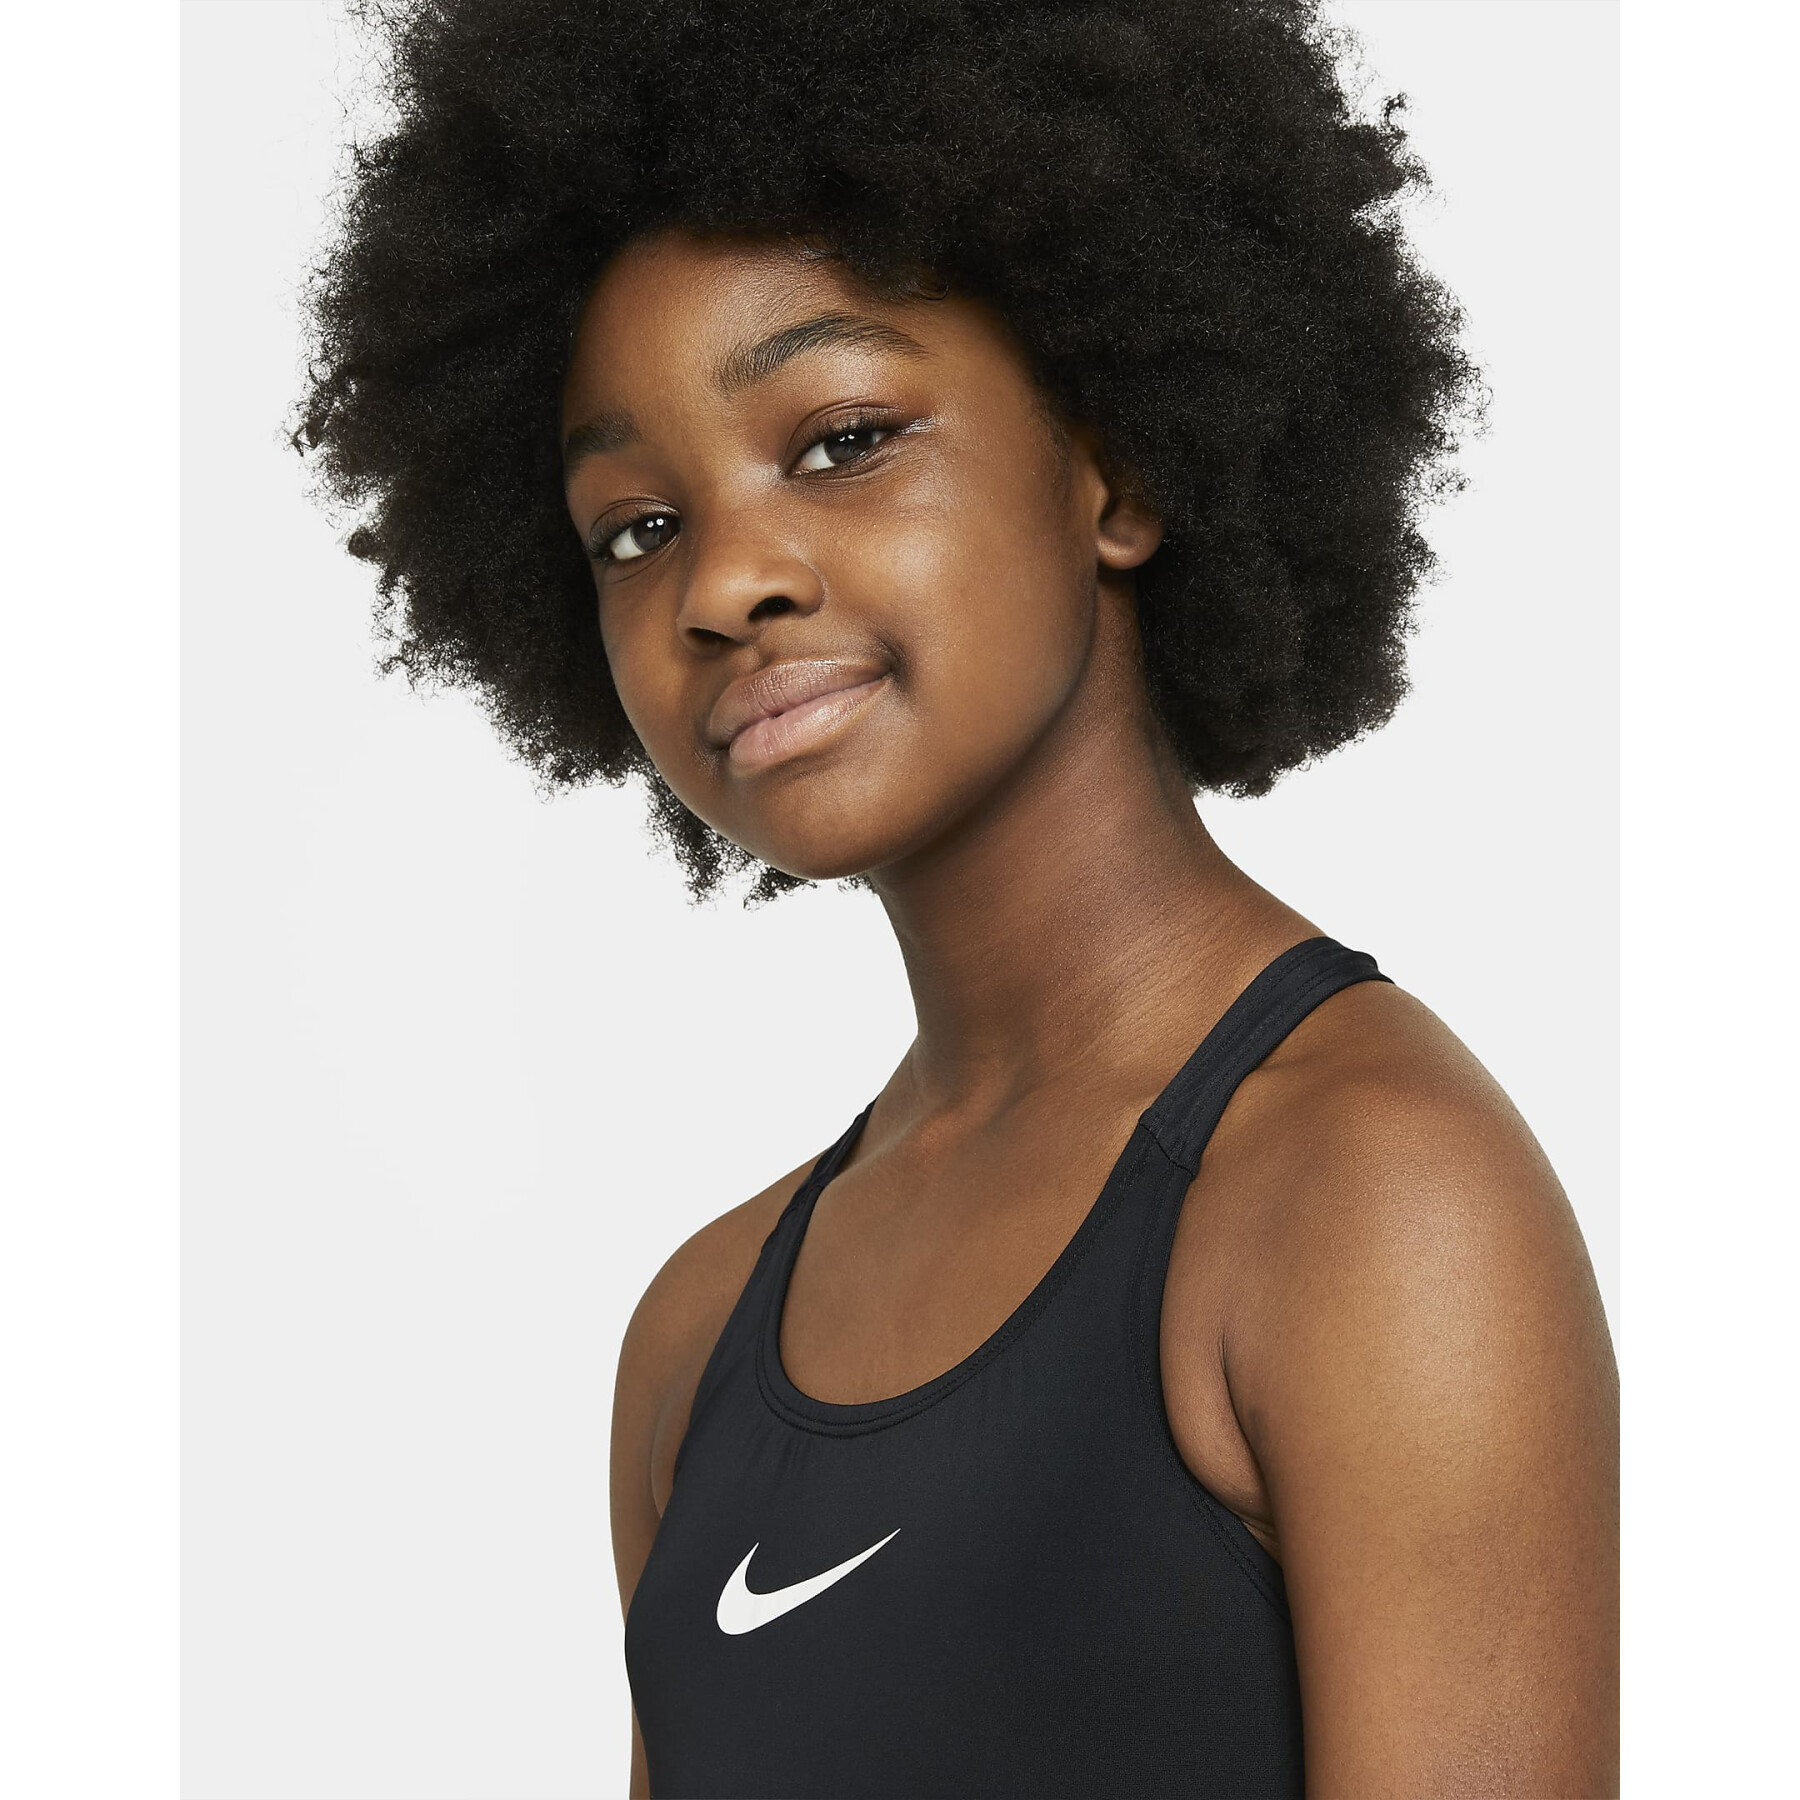 One-piece swimsuit for girls Nike Essential